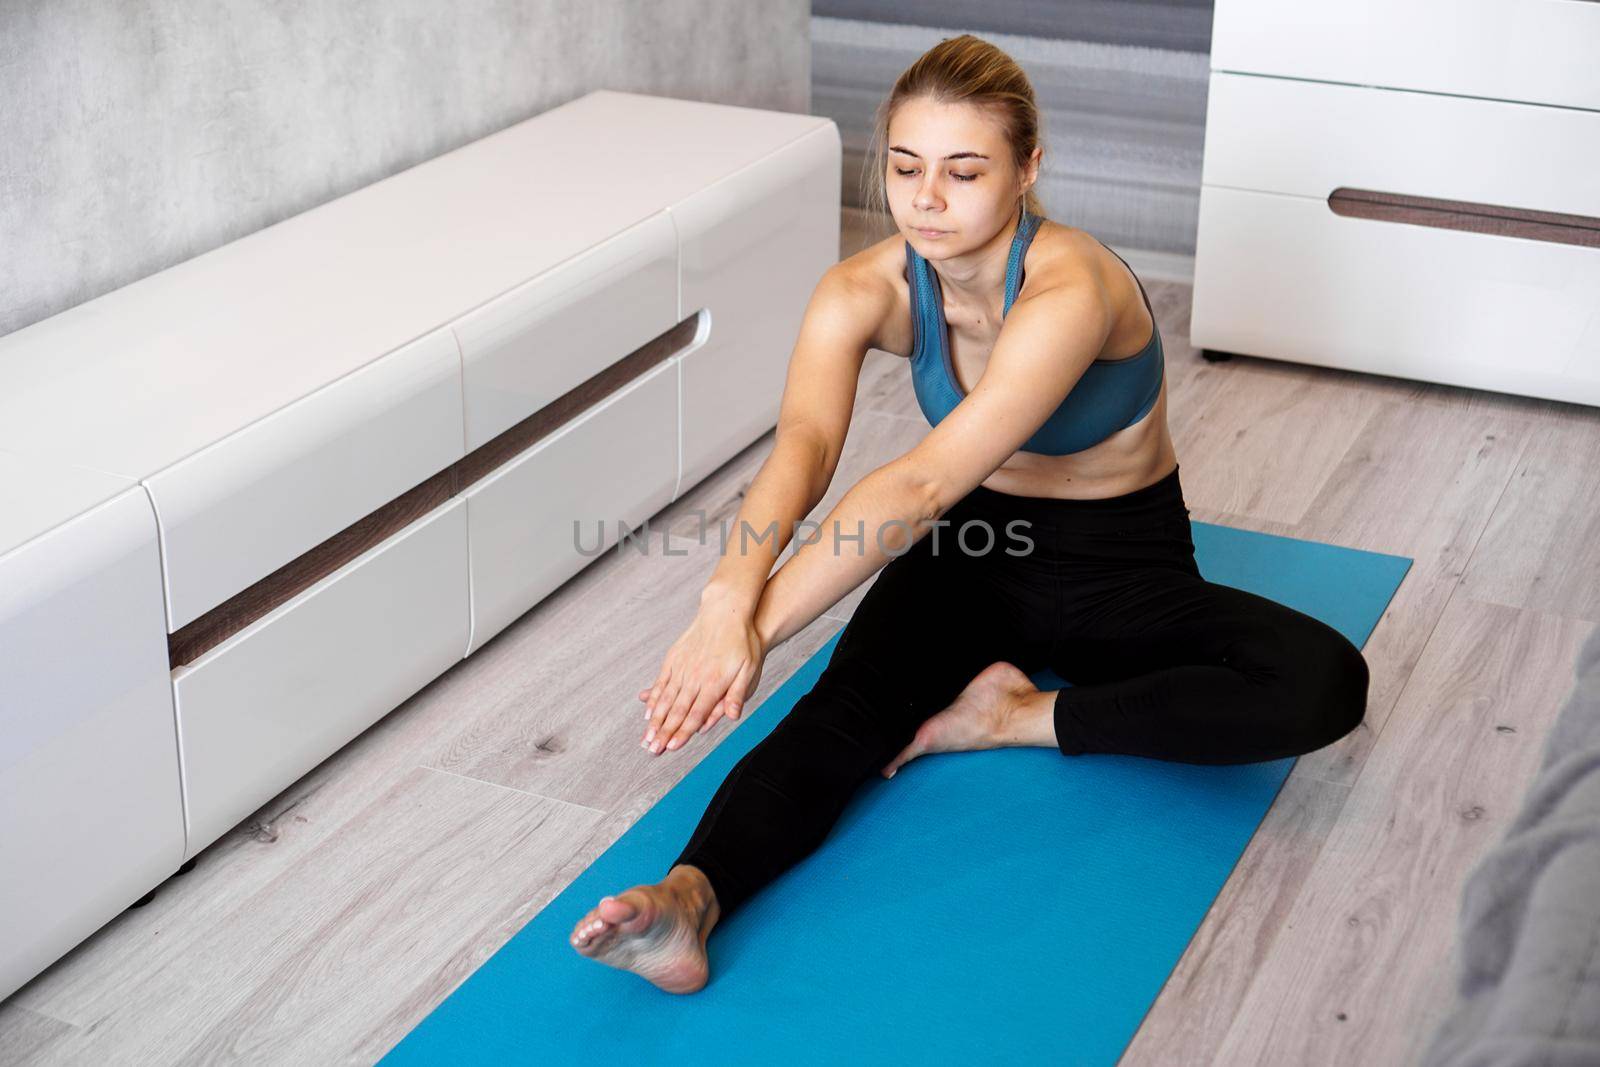 Sport, training and lifestyle concept - woman stretching leg on blue yoga mat at home in the living room